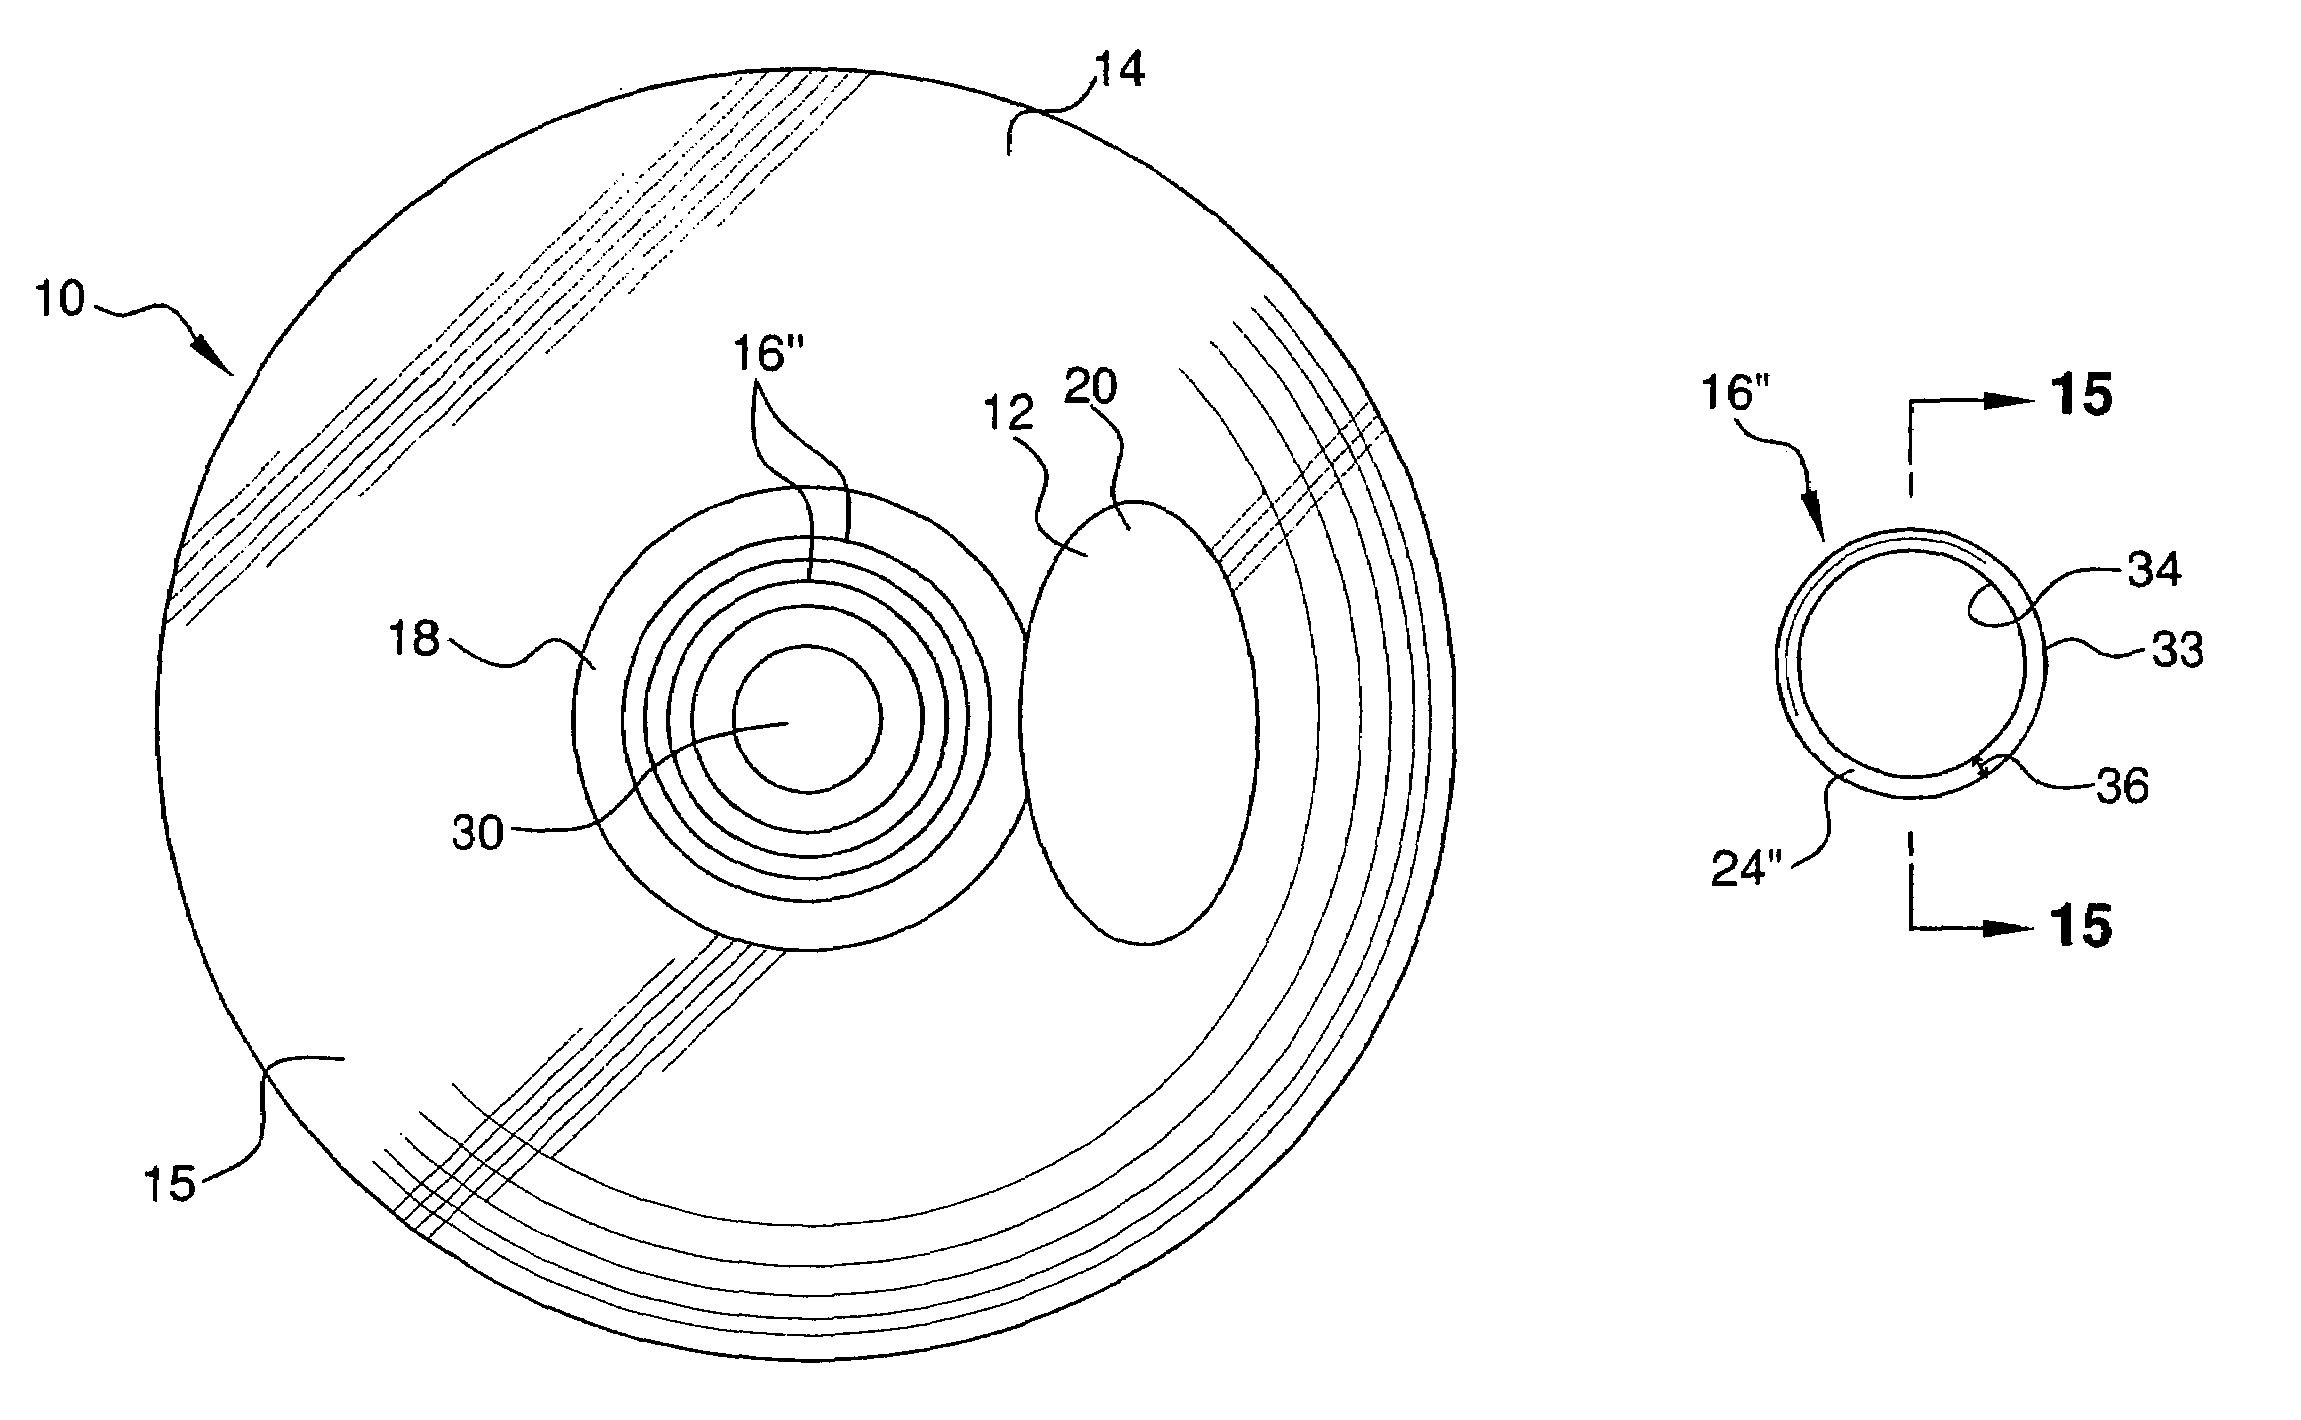 Method for producing a multifocal corneal surface using intracorneal microscopic lenses